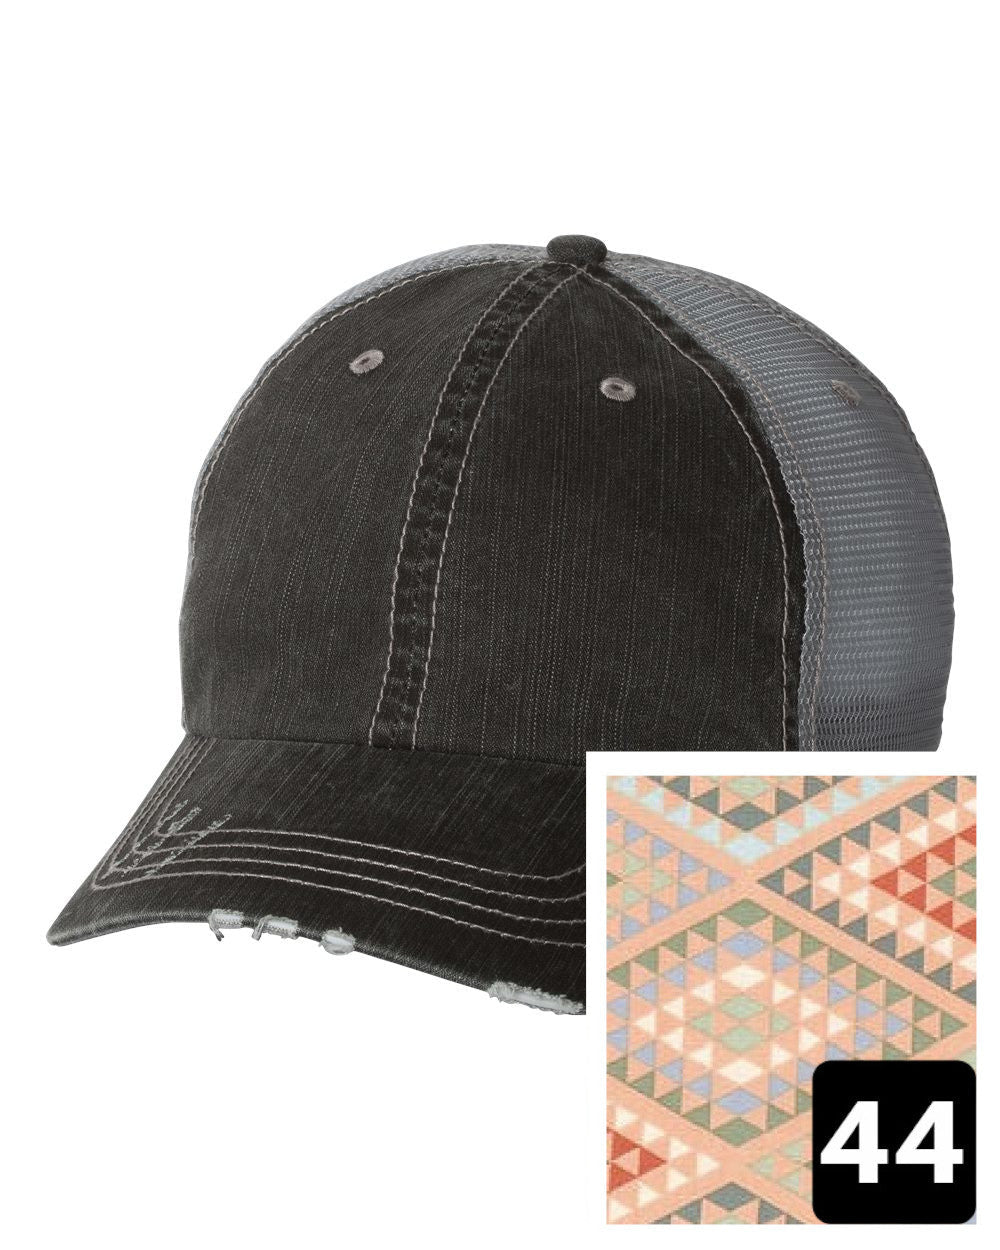 gray distressed trucker hat with navy coral and white chevron fabric state of South Carolina